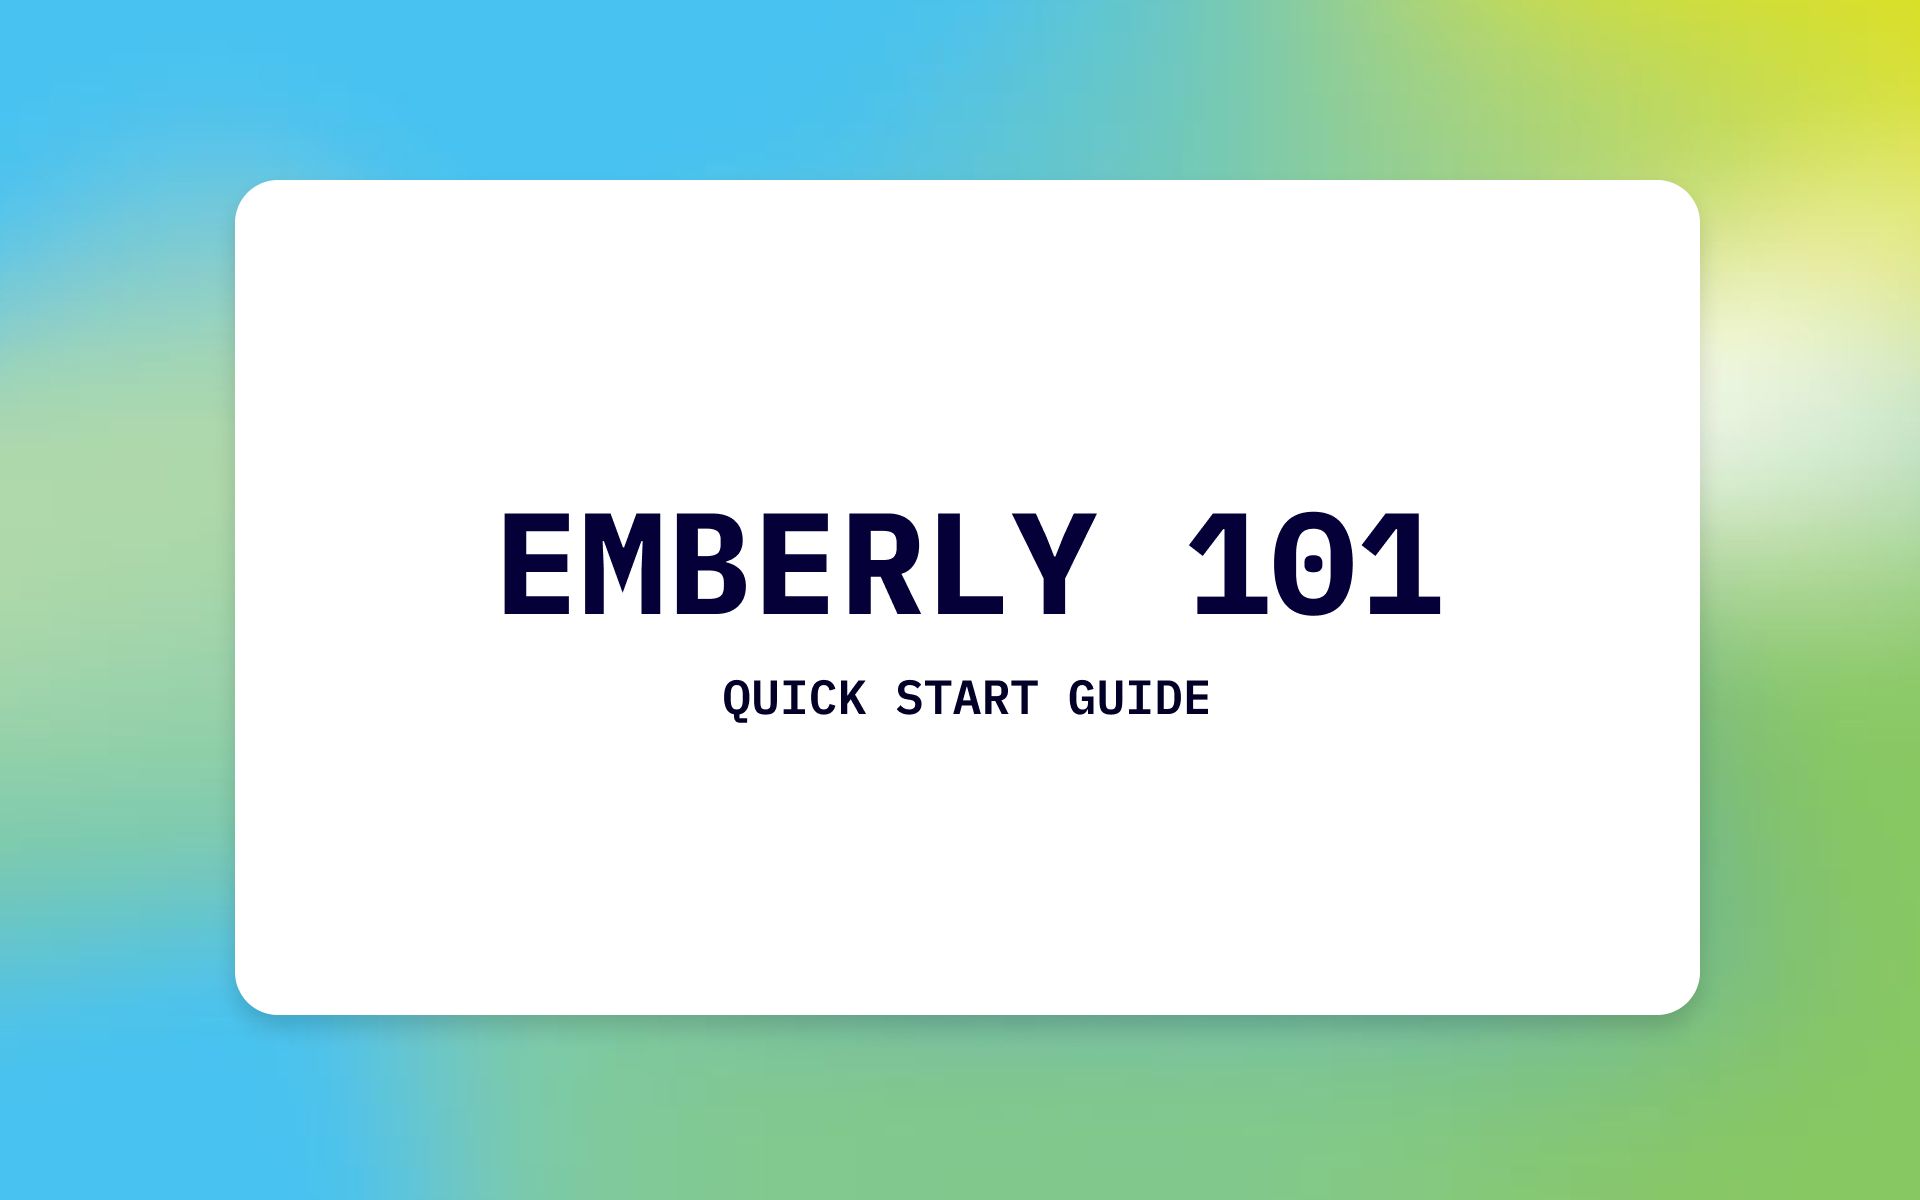 How to use Emberly